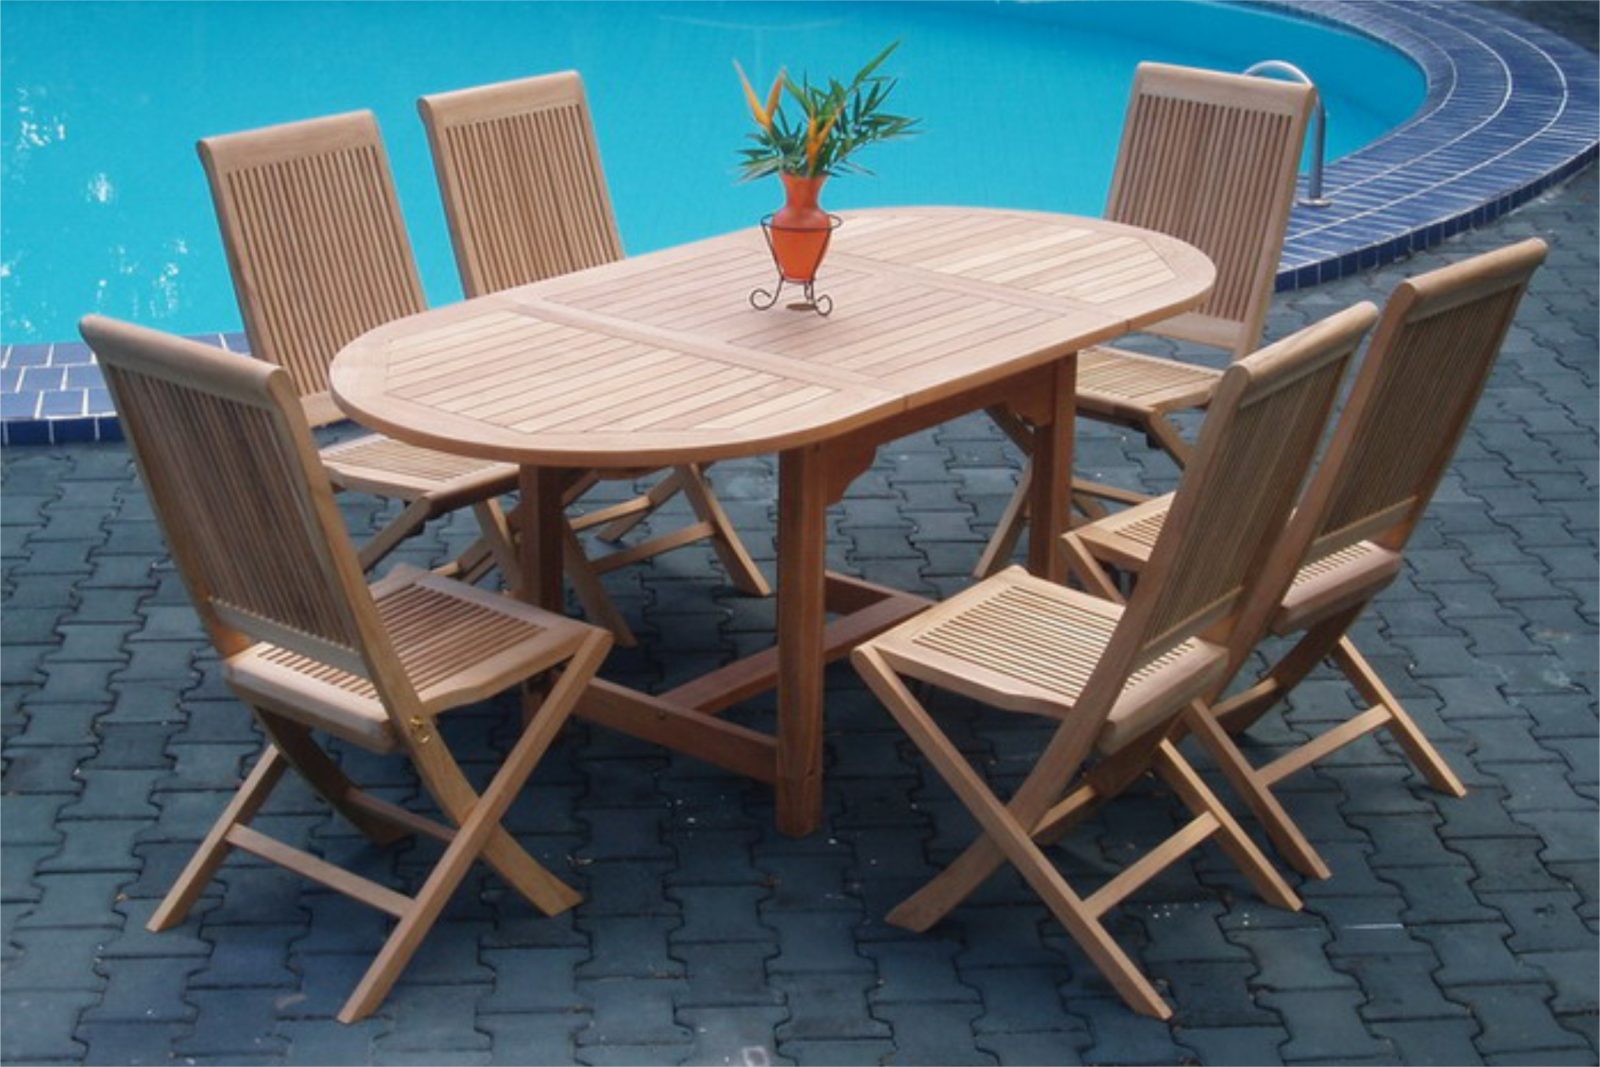 Caring For Your Indoor Teak Furniture: Tips And Tricks To Keep It Looking New